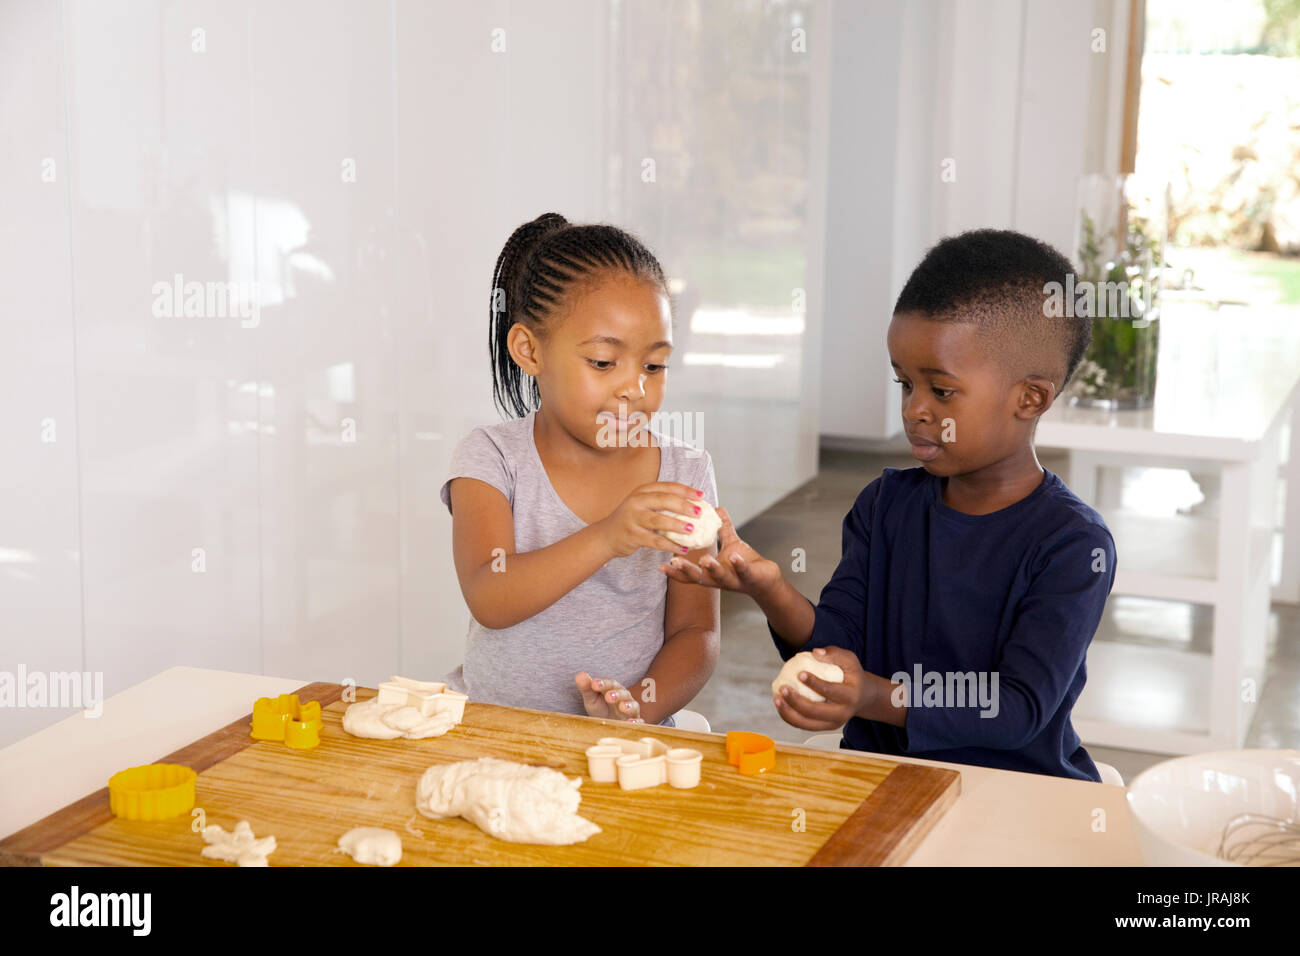 brother and sister making cookies Stock Photo